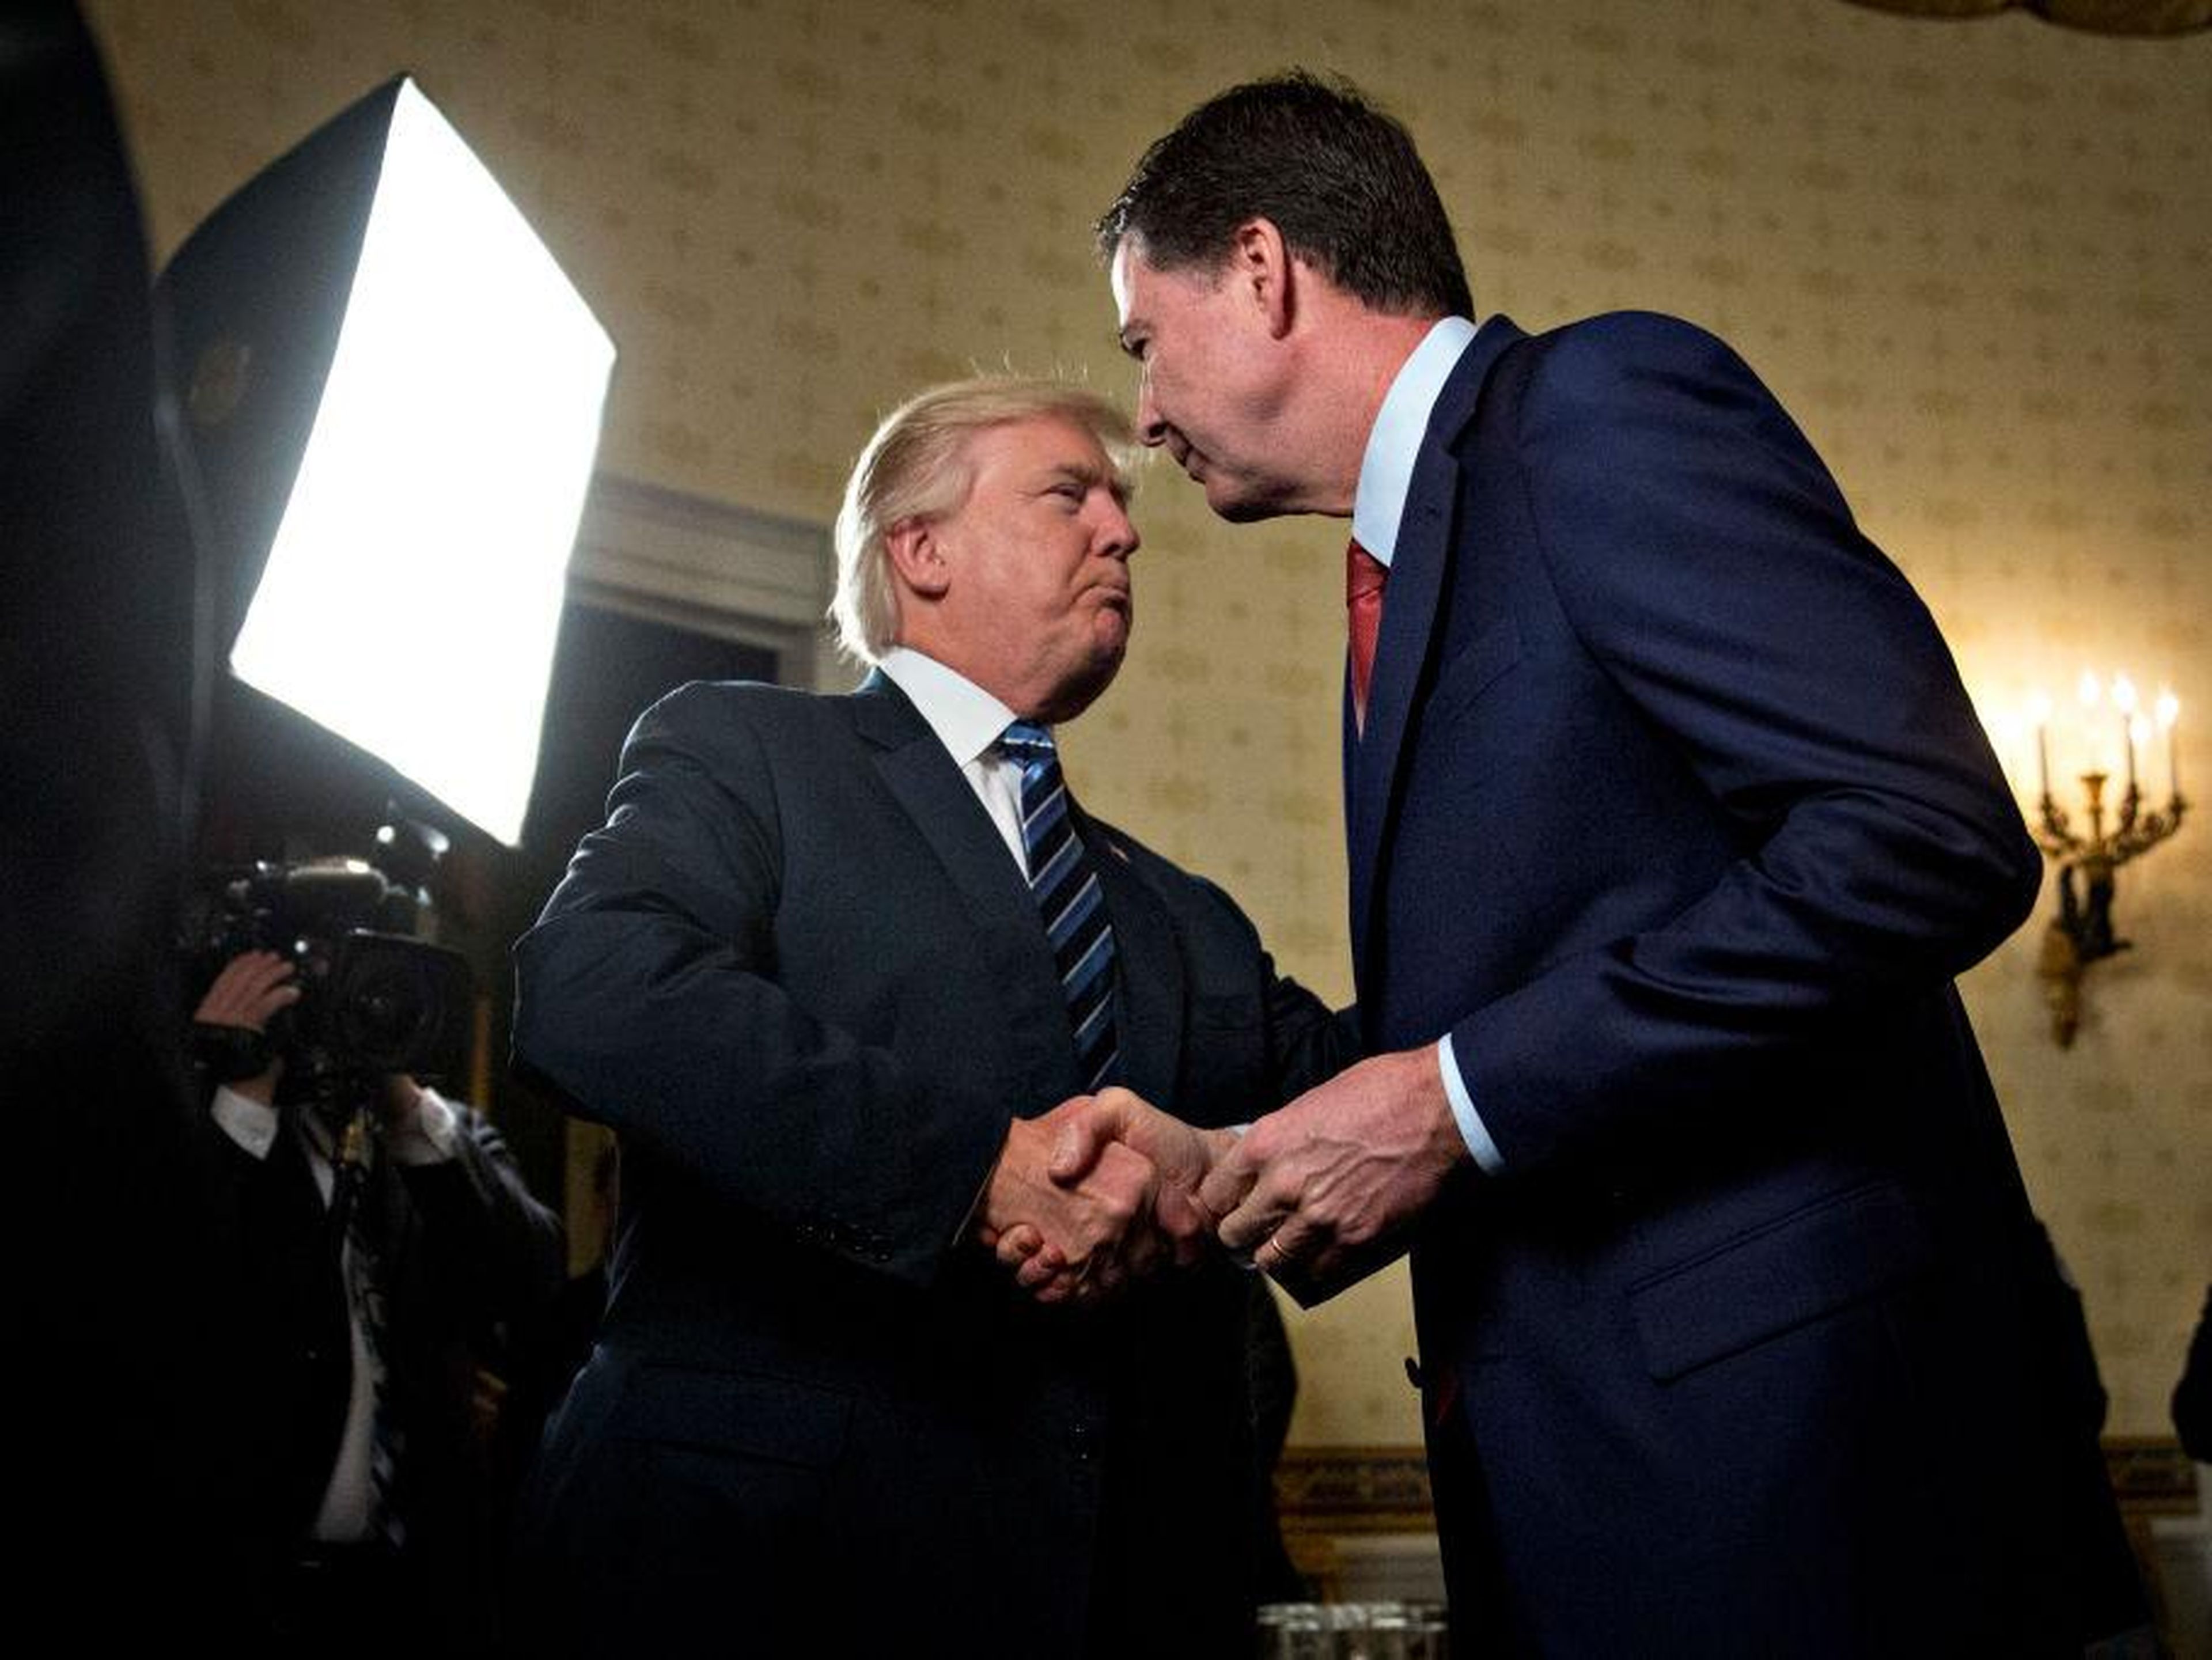 Just look at former FBI director James Comey's penchant for note-taking, which came in handy during his 2017 appearance before the Senate Intelligence Committee. The ousted director's habit was not an aberration, but a part of the